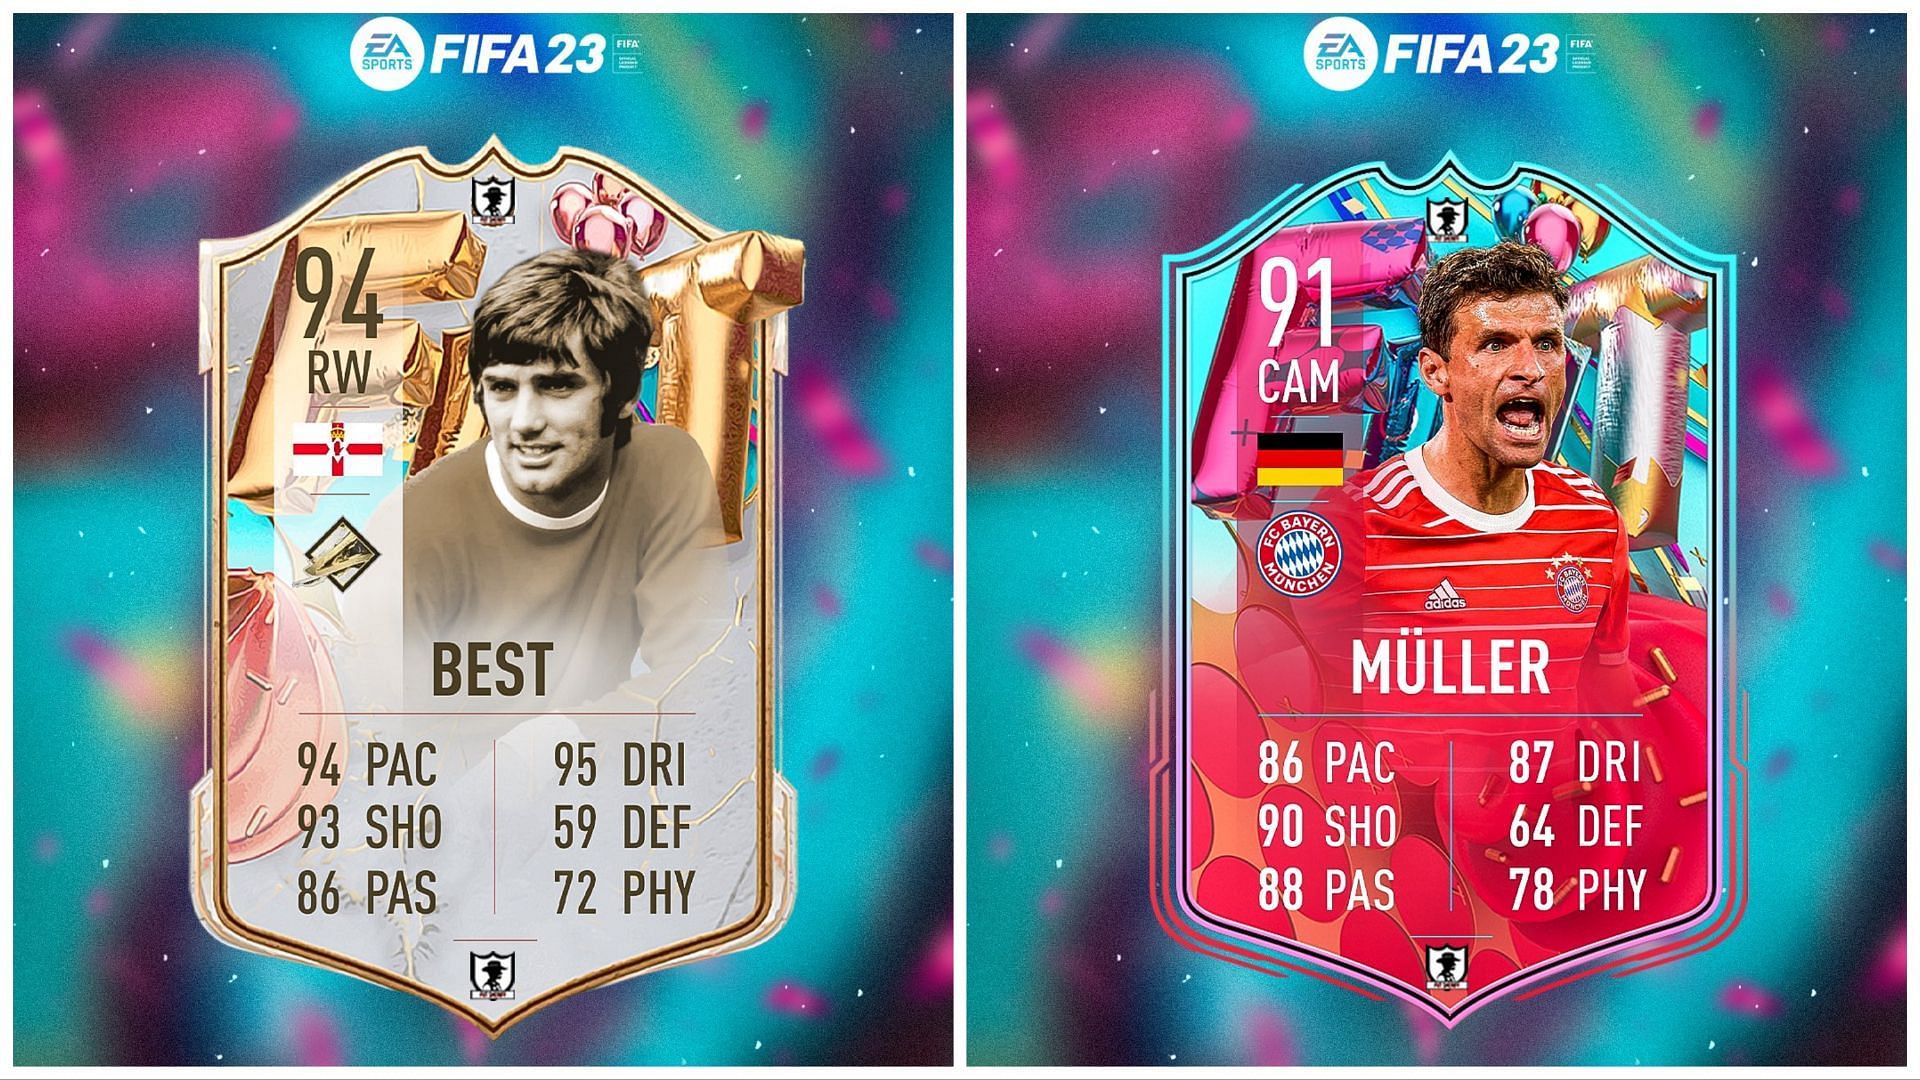 FUT Birthday George Best and Thomas Muller have been leaked (Images via Twitter/FUT Sheriff)